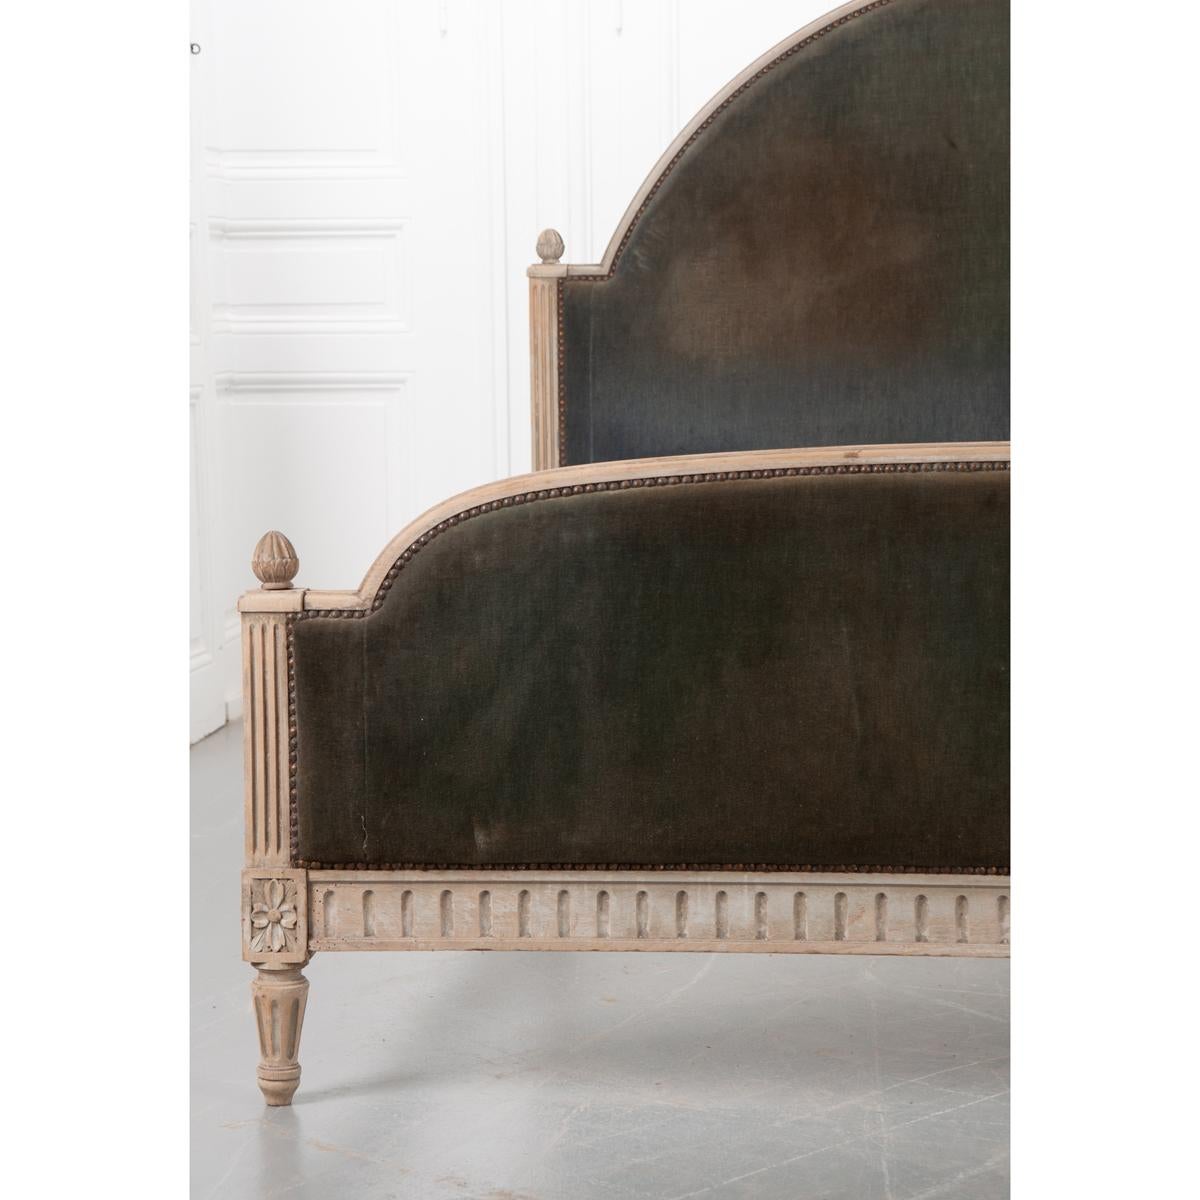 This elegant, 19th century bed is painted and upholstered. It has an off white, greenish paint highlighting the details and a very worn soft blue velvet for the upholstery accented by brass nailhead trim. The headboard has a nice big arch framed by